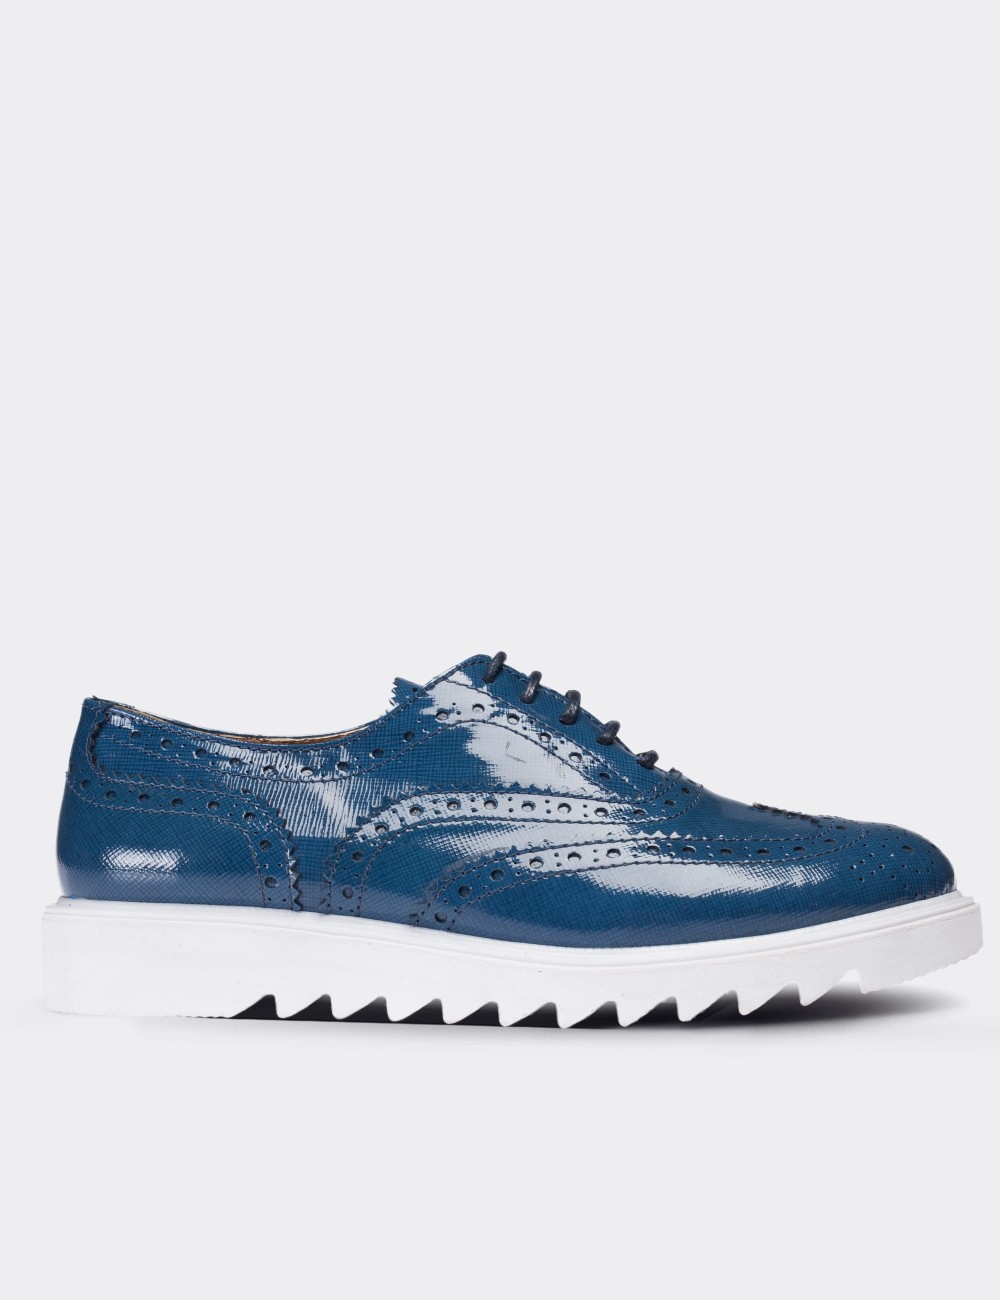 Blue Patent Leather Lace-up Shoes - 01418ZMVIP02